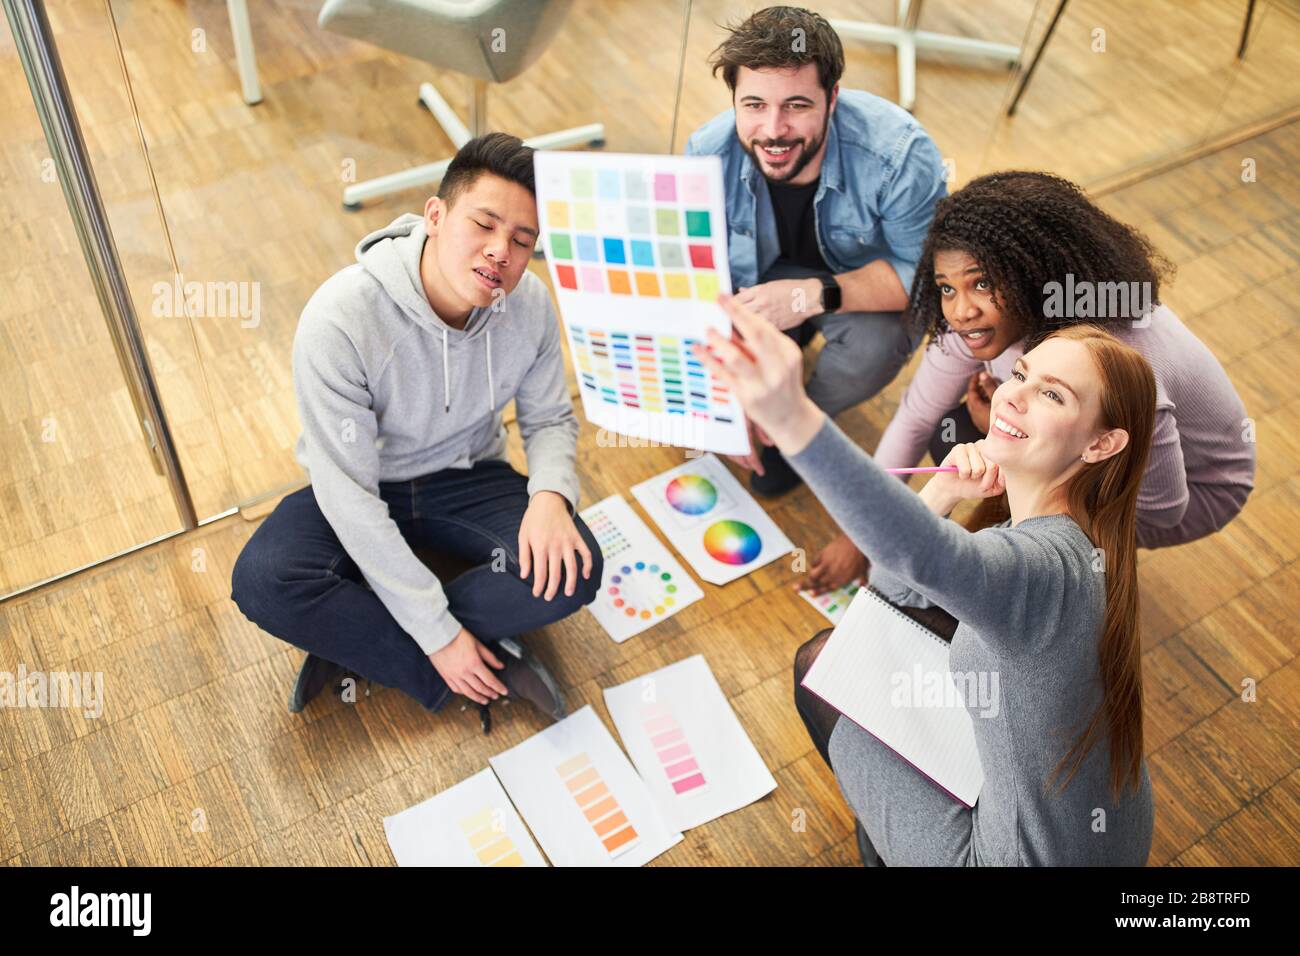 Graphic designer team in internet agency at brainstorming for the color design of a website Stock Photo